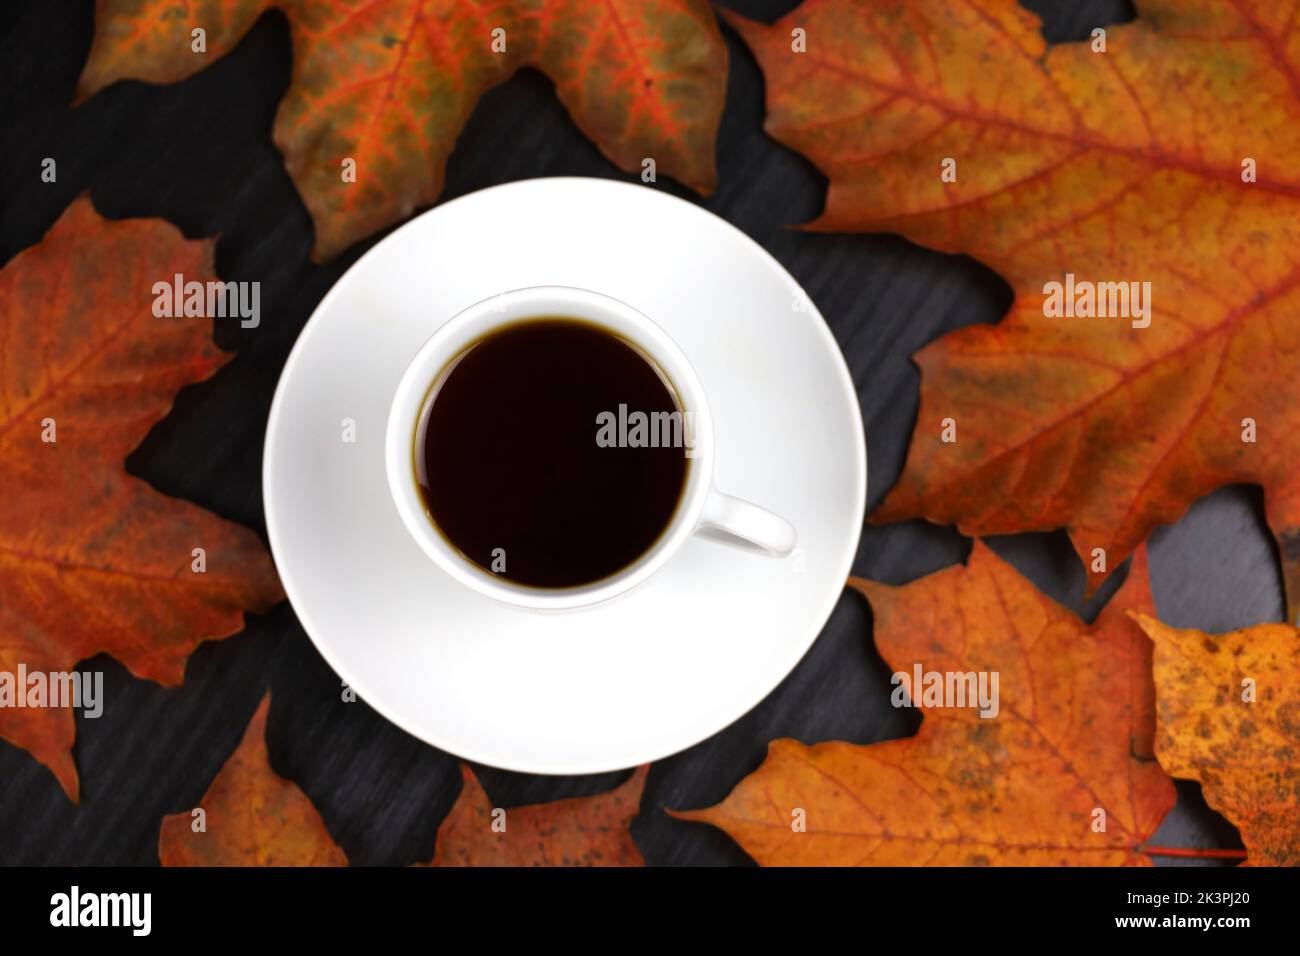 White cup of coffee or tea with saucer on red maple leaves and black table. Hot drink in autumn weather Stock Photo